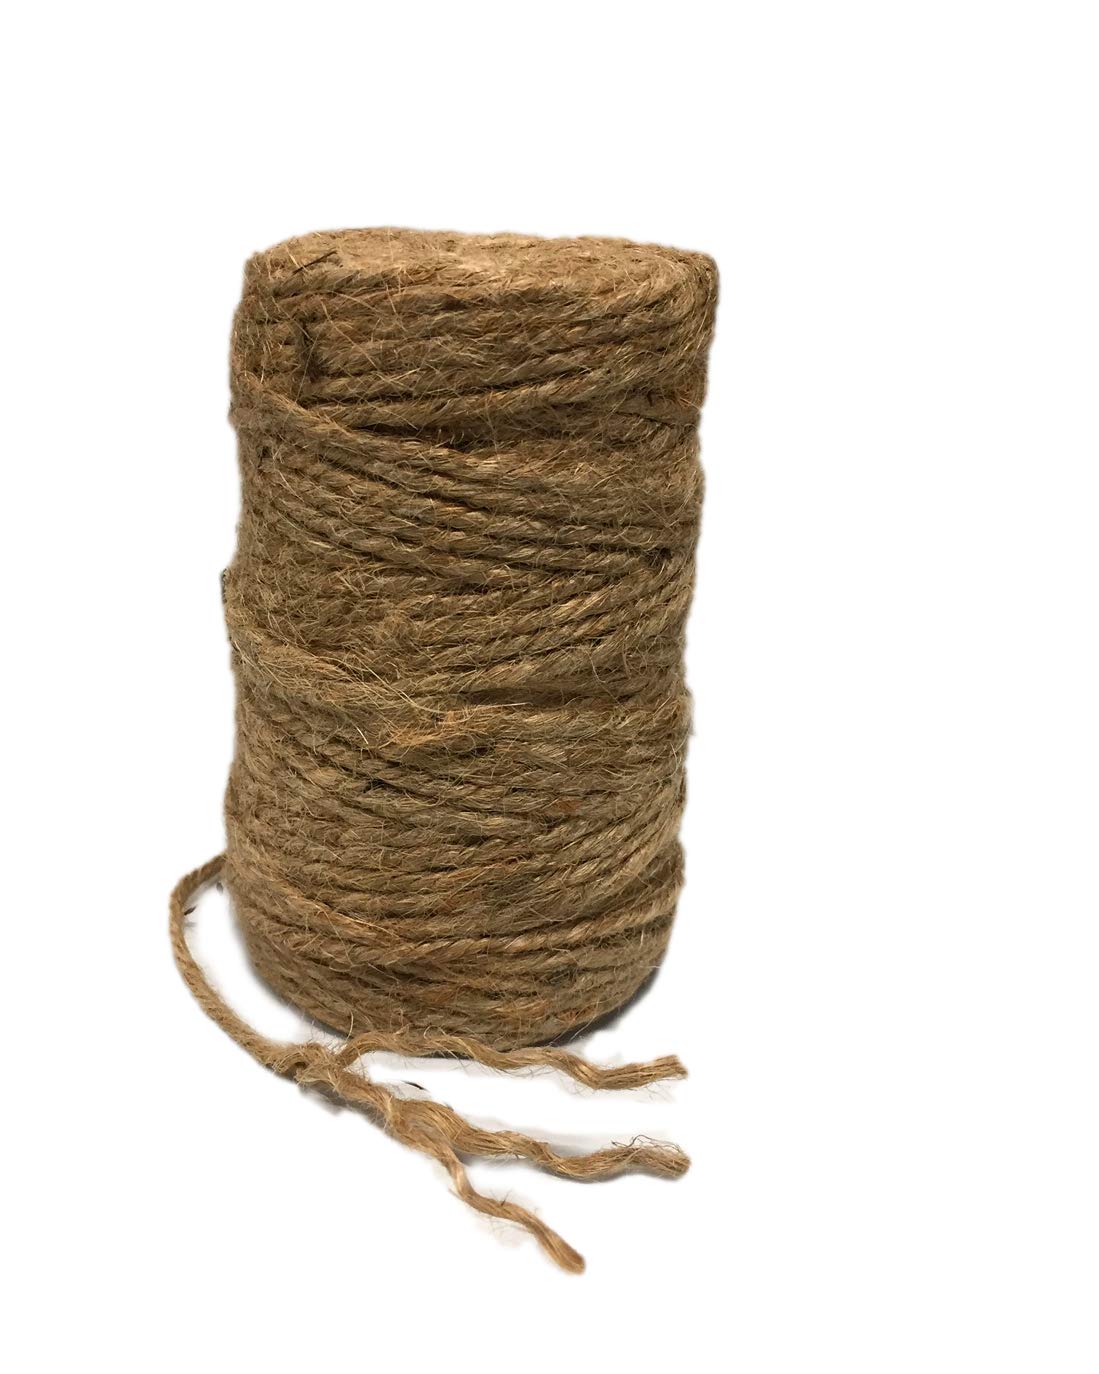 AAYU Natural Jute Rope 3 Ply 150 Feet Heavy Duty Jute Garden Twine for Arts and Crafts Industrial Packing Gift Wrapping Decorations Gardening